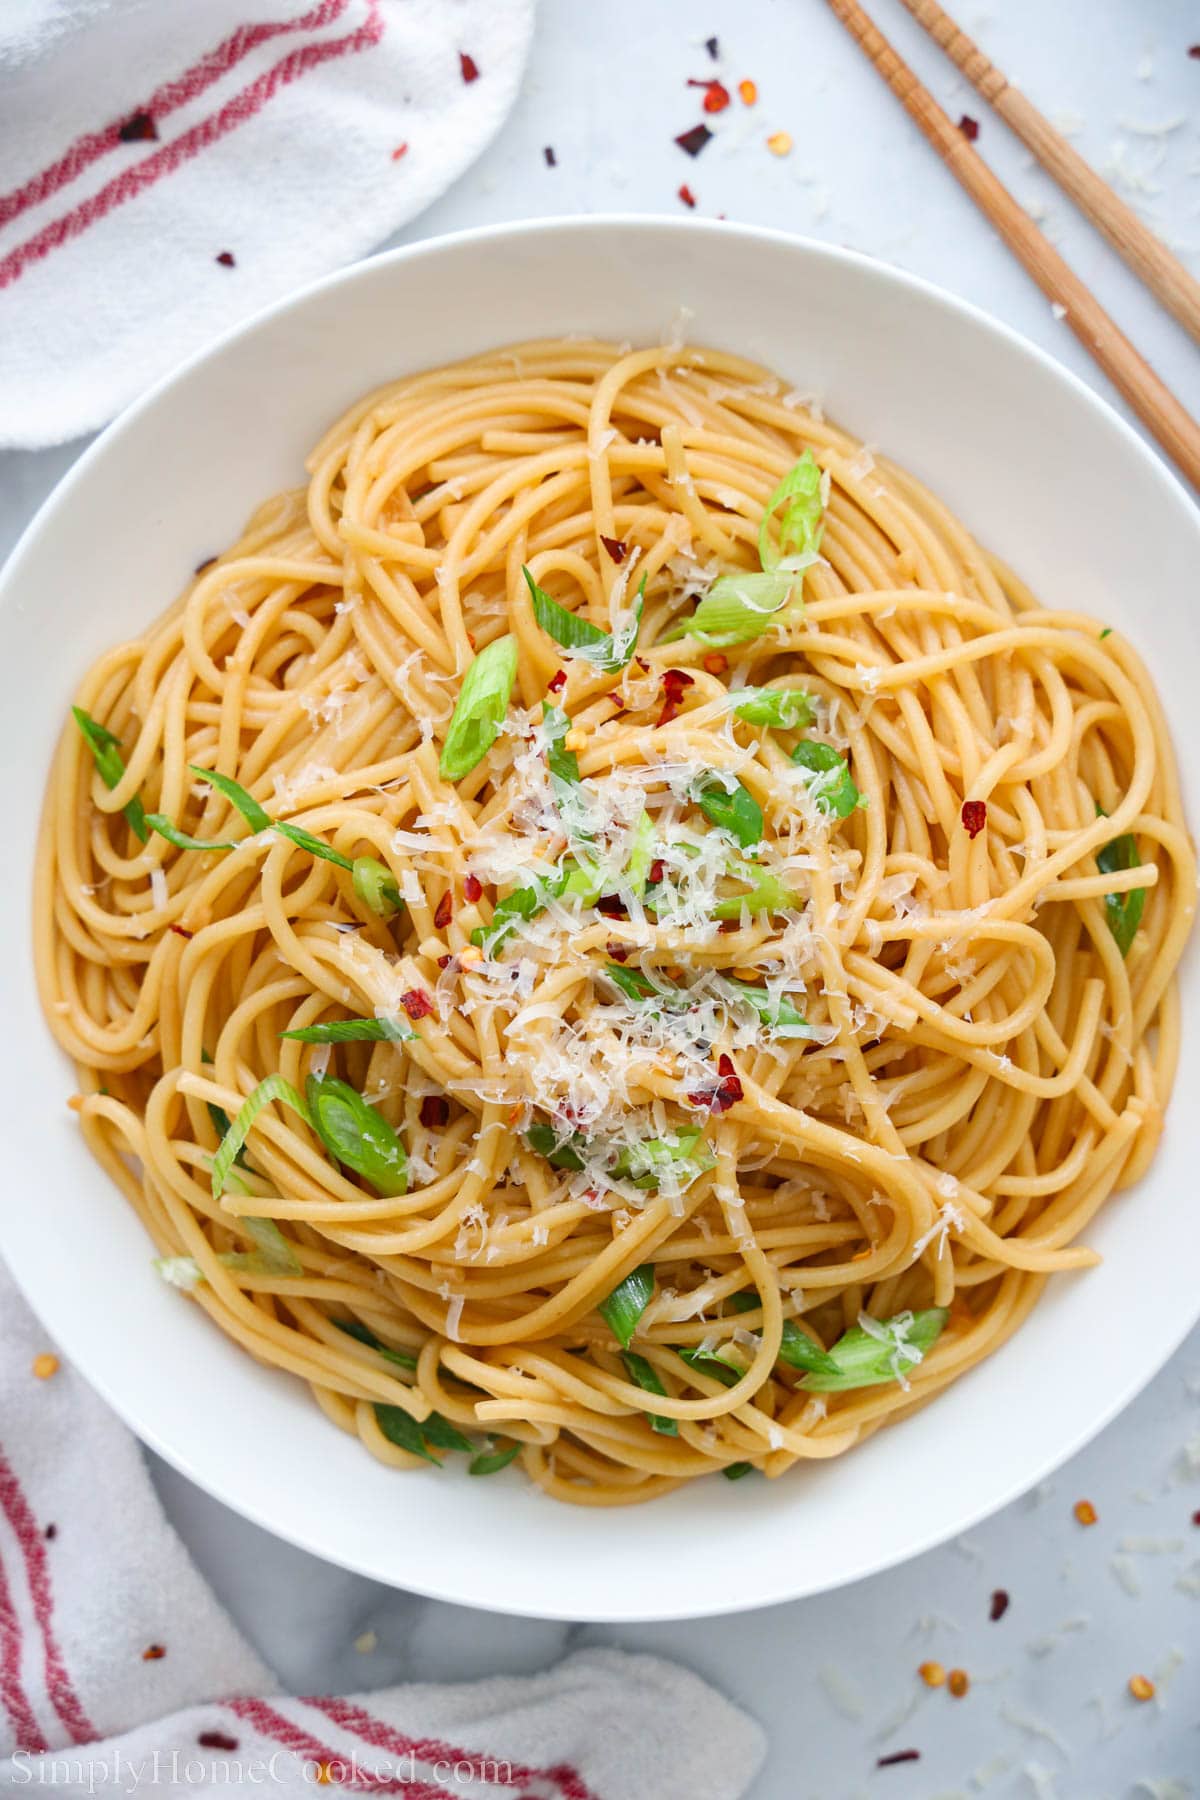 Plate of Garlic Noodles topped with parmesan cheese, green onions, and red pepper flakes.